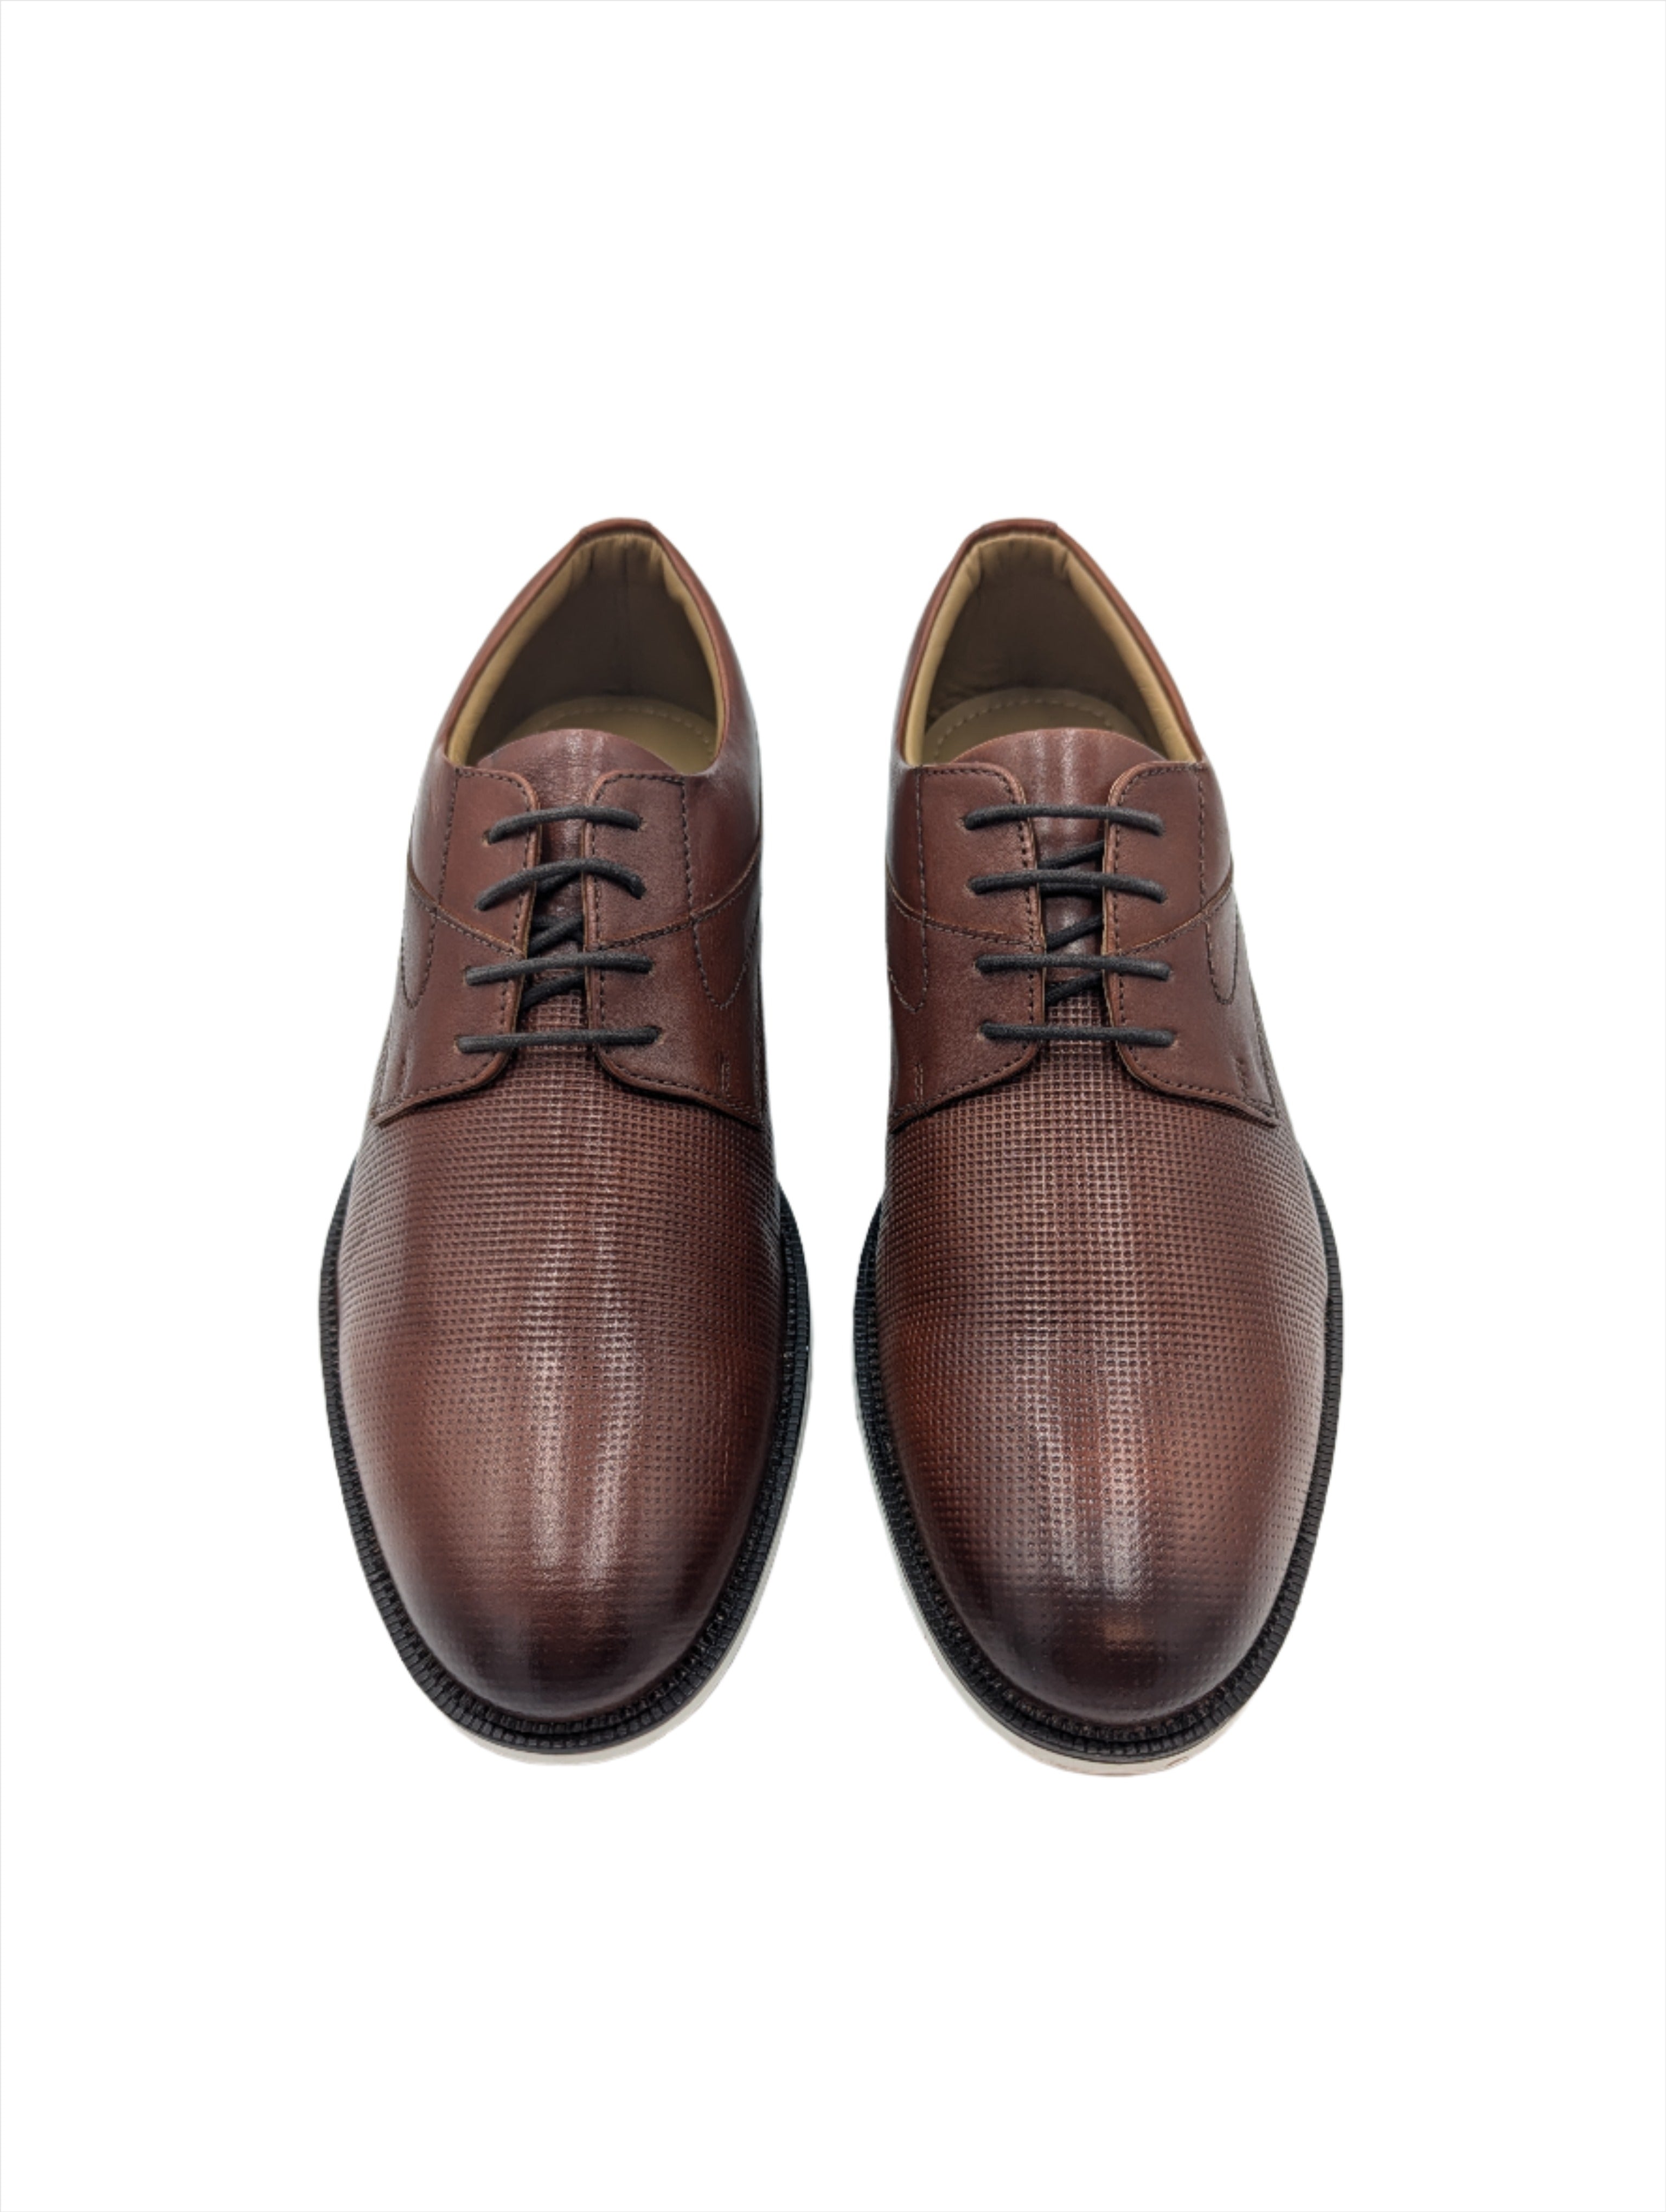 Leather Lace Shoe With White Gum Sole - Tan-Toe view